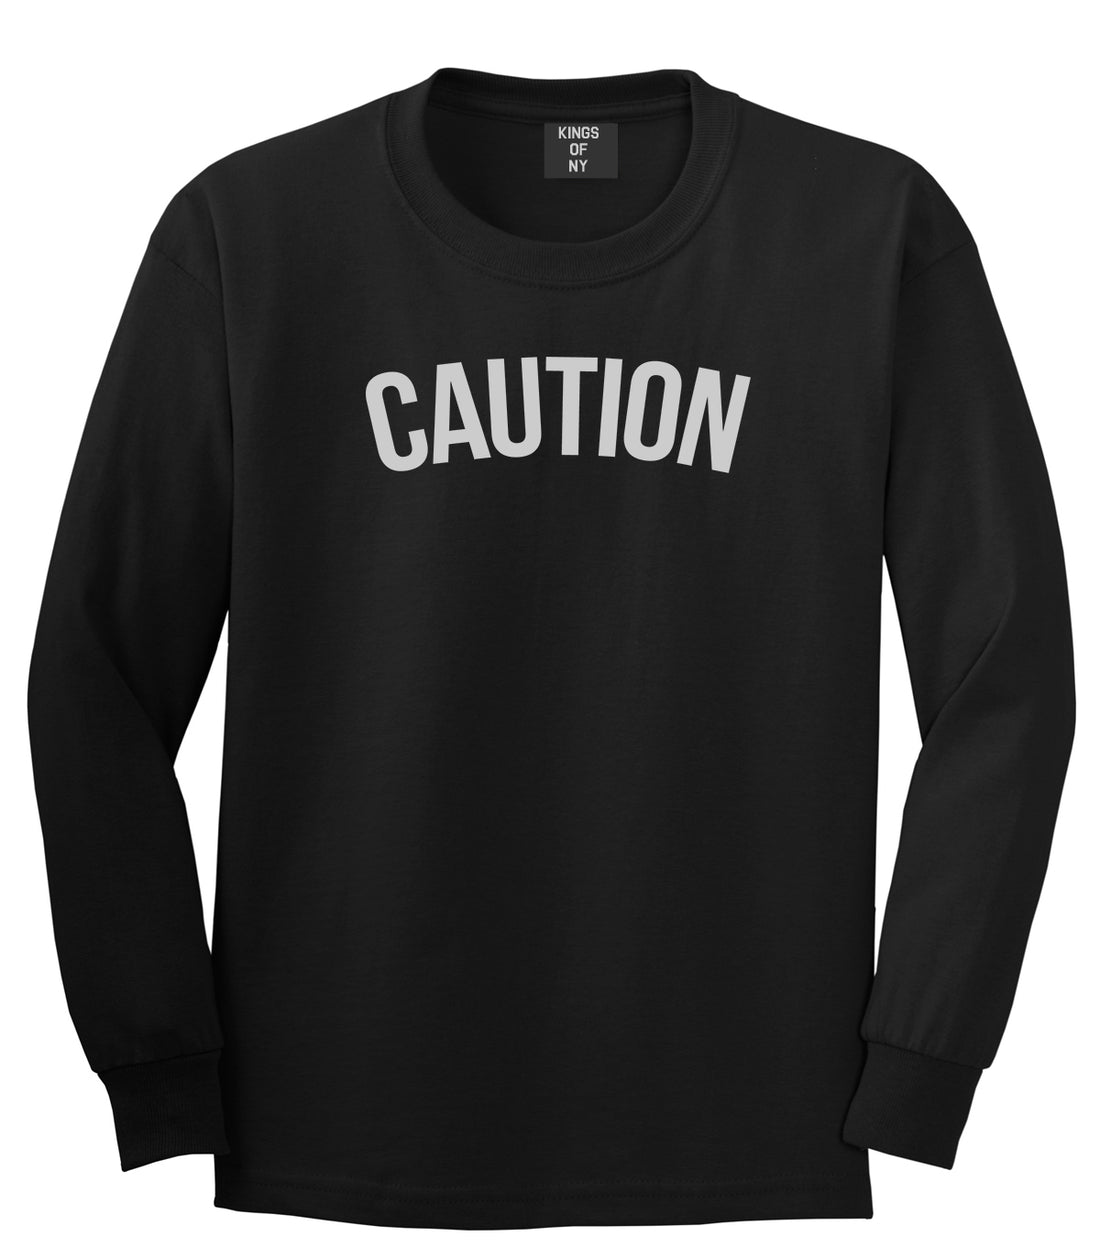 Caution Mens Long Sleeve T-Shirt Black by Kings Of NY